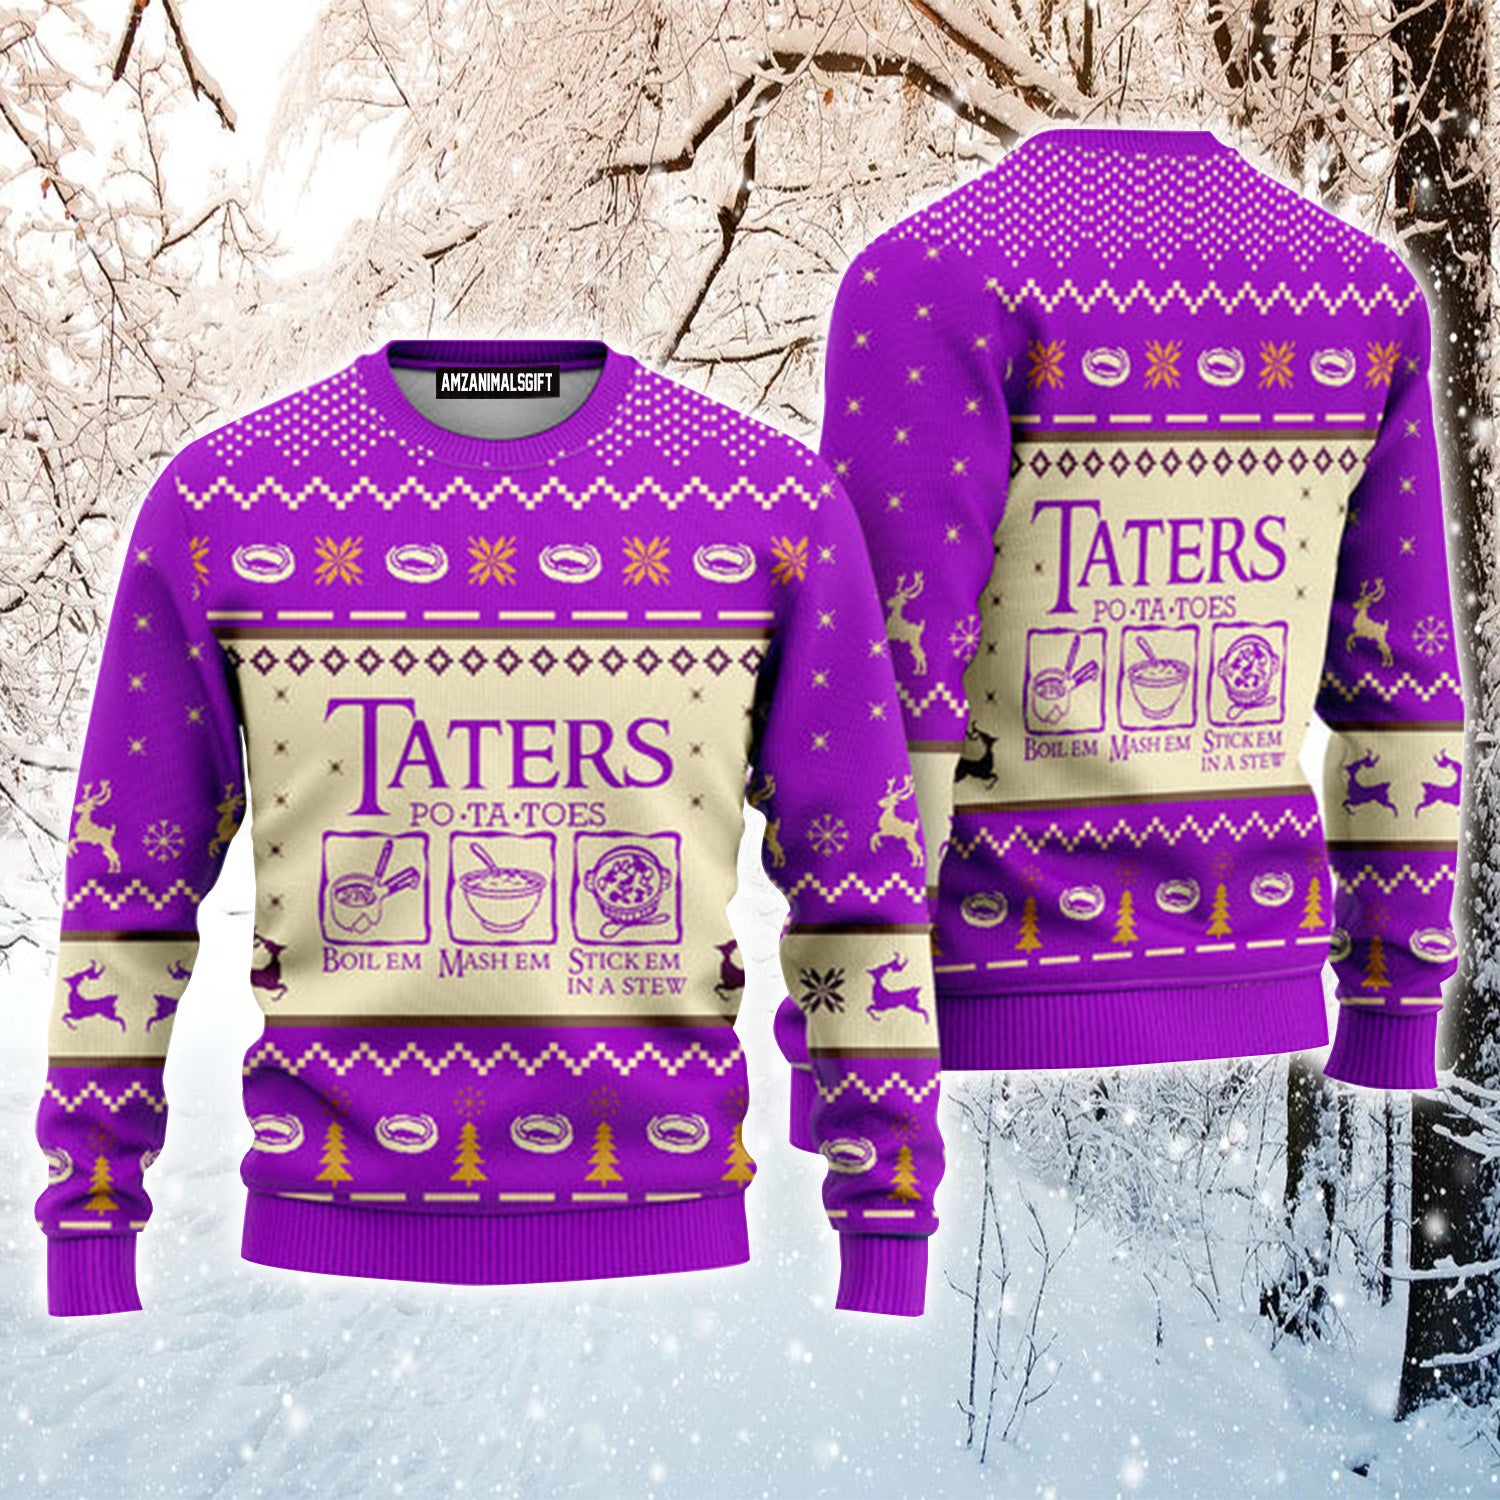 LOTR Potatoes Taters Purple Urly Christmas Sweater, Christmas Sweater For Men & Women - Perfect Gift For Christmas, Family, Friends